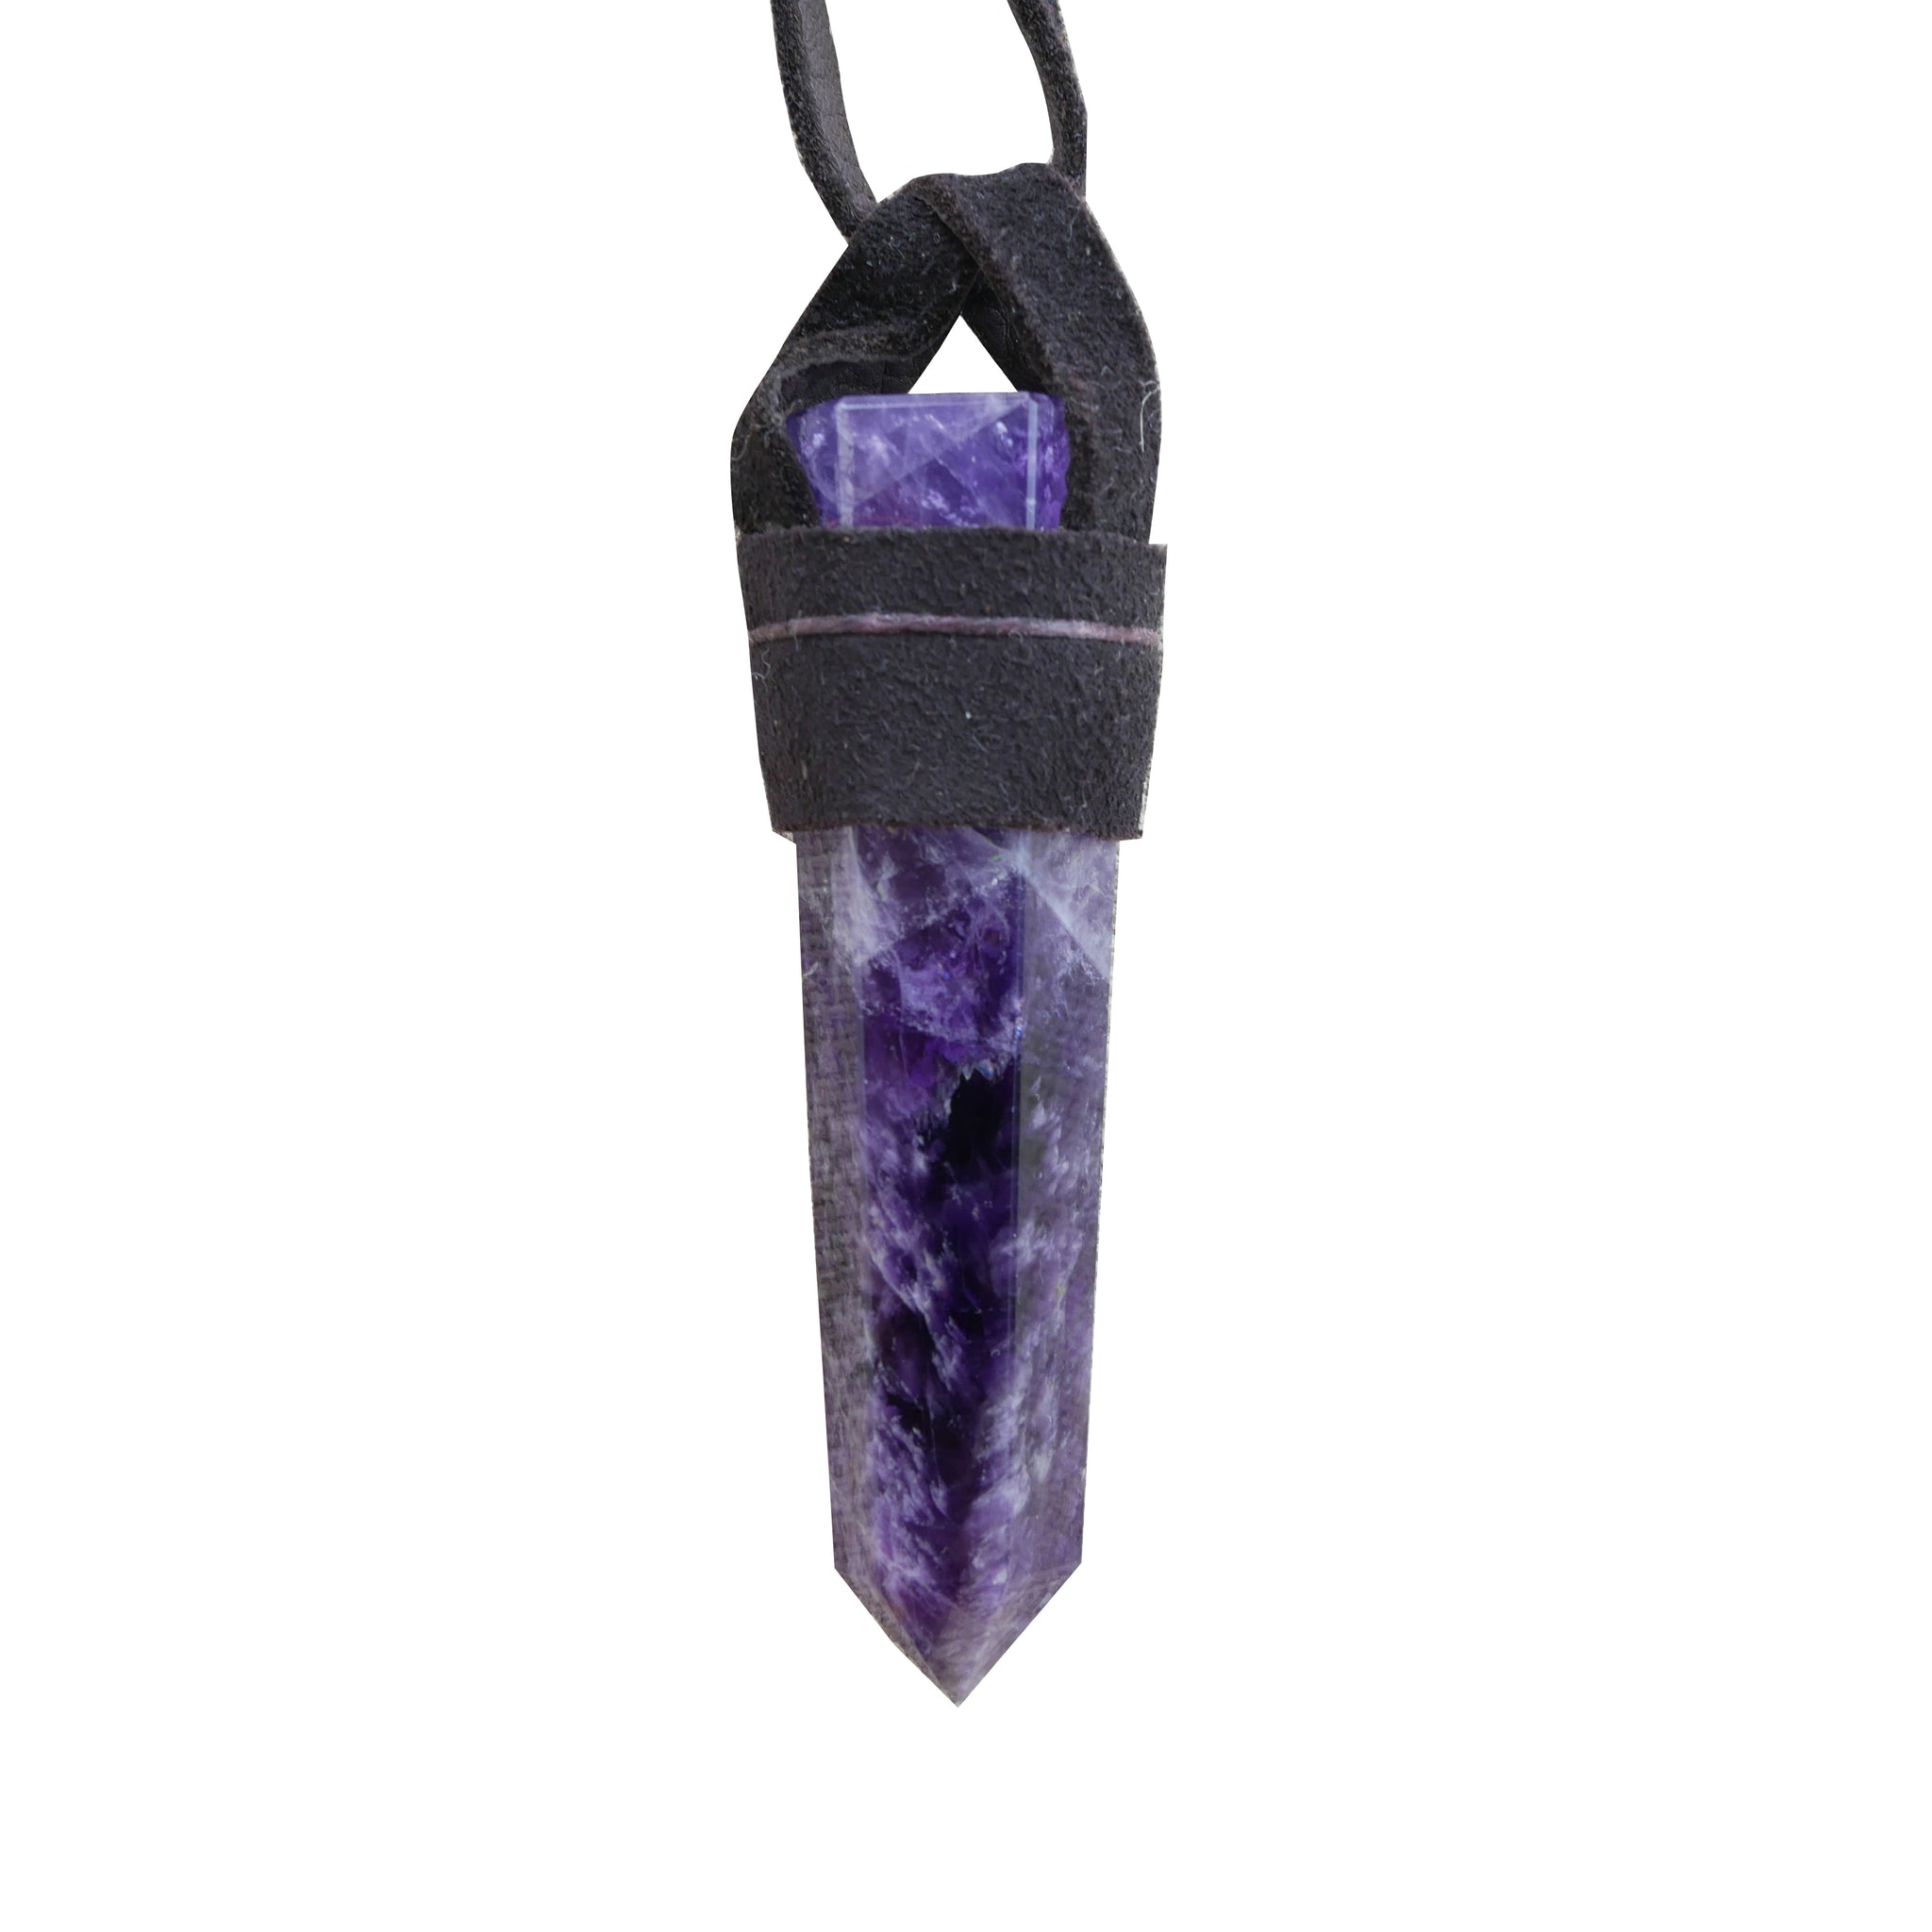 AMETHYST PENDANT ON SUEDE LEATHER STRAP